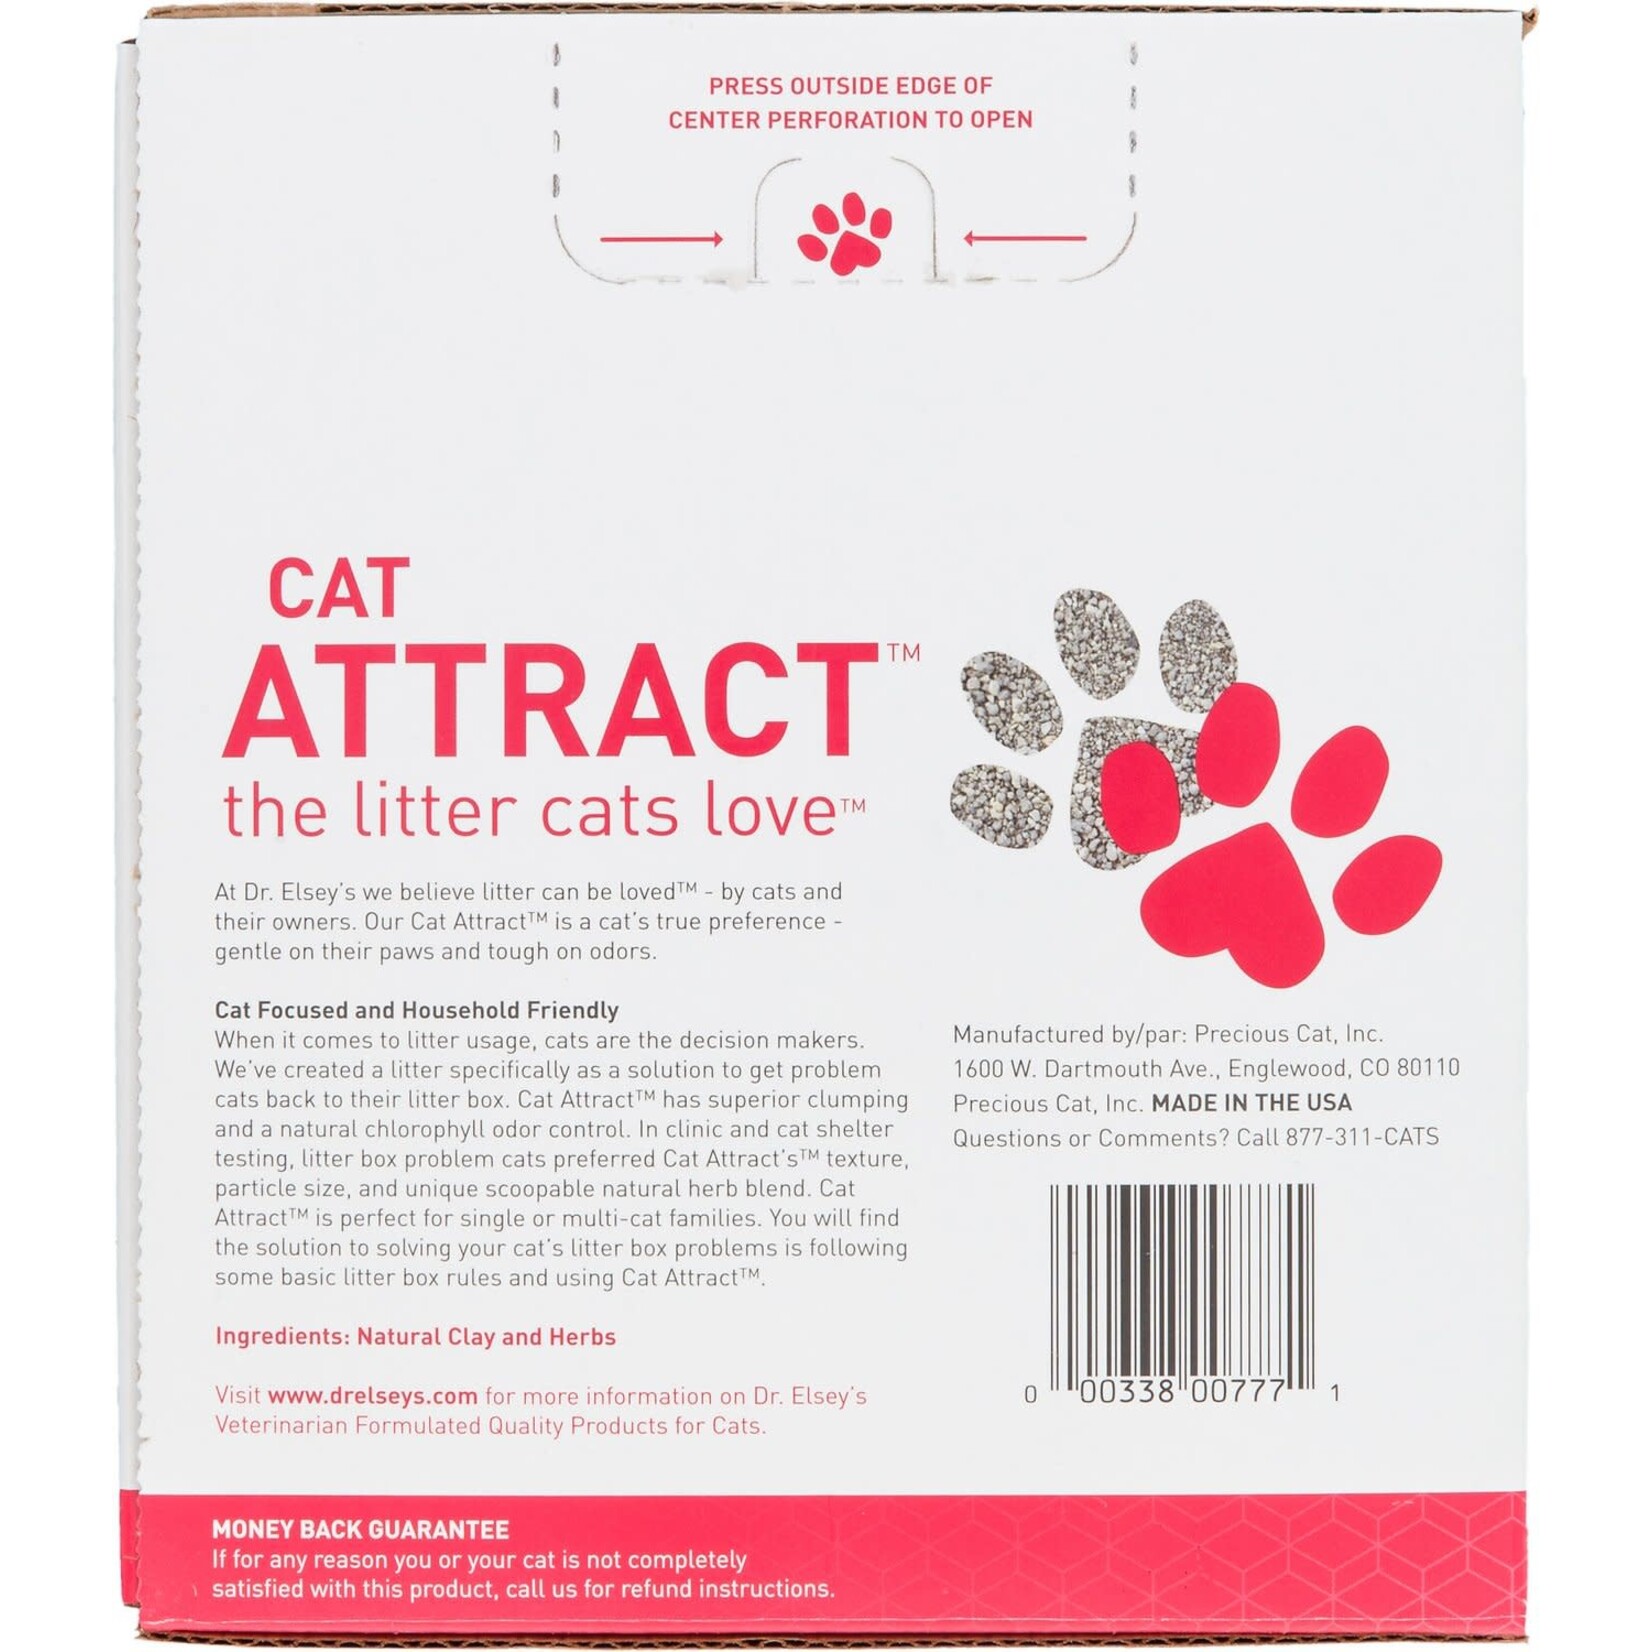 Dr. Elsey's Precious Cat Cat Attract Unscented Clumping Clay Cat Litter